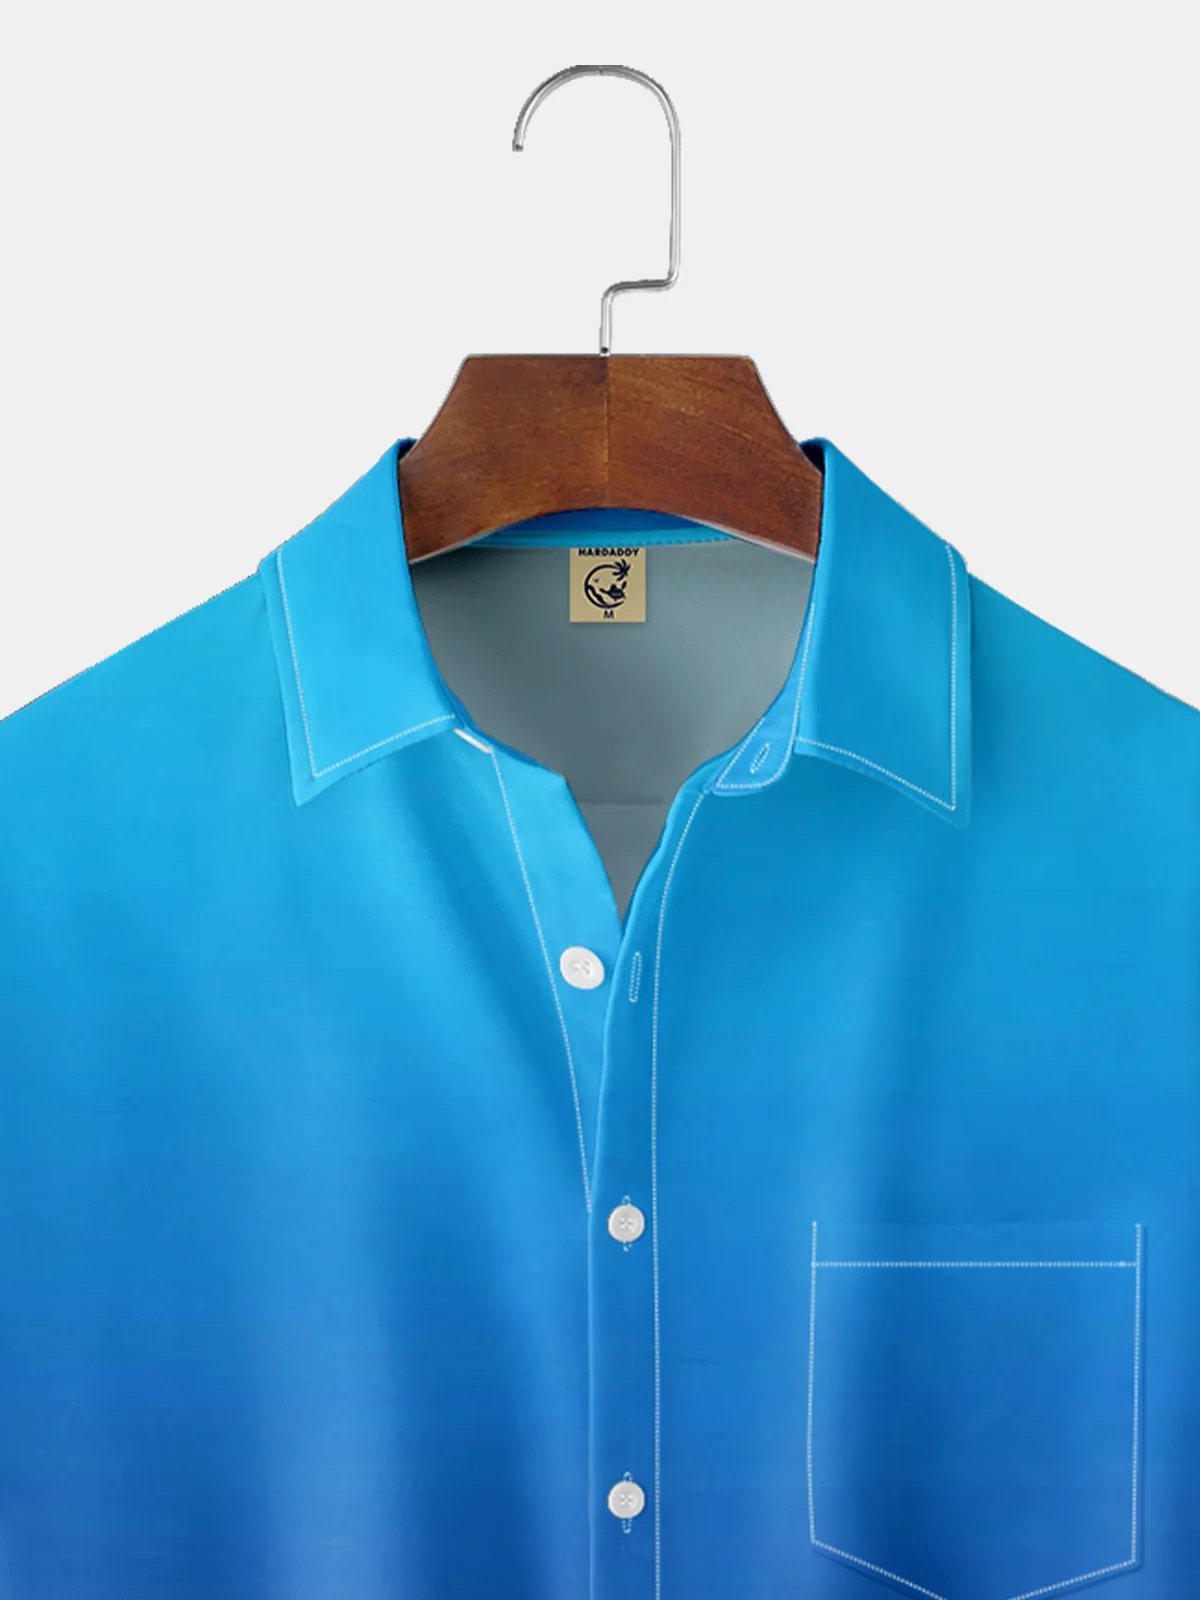 Hardaddy Moisture-wicking Breathable Ombre Chest Pocket Casual Shirt